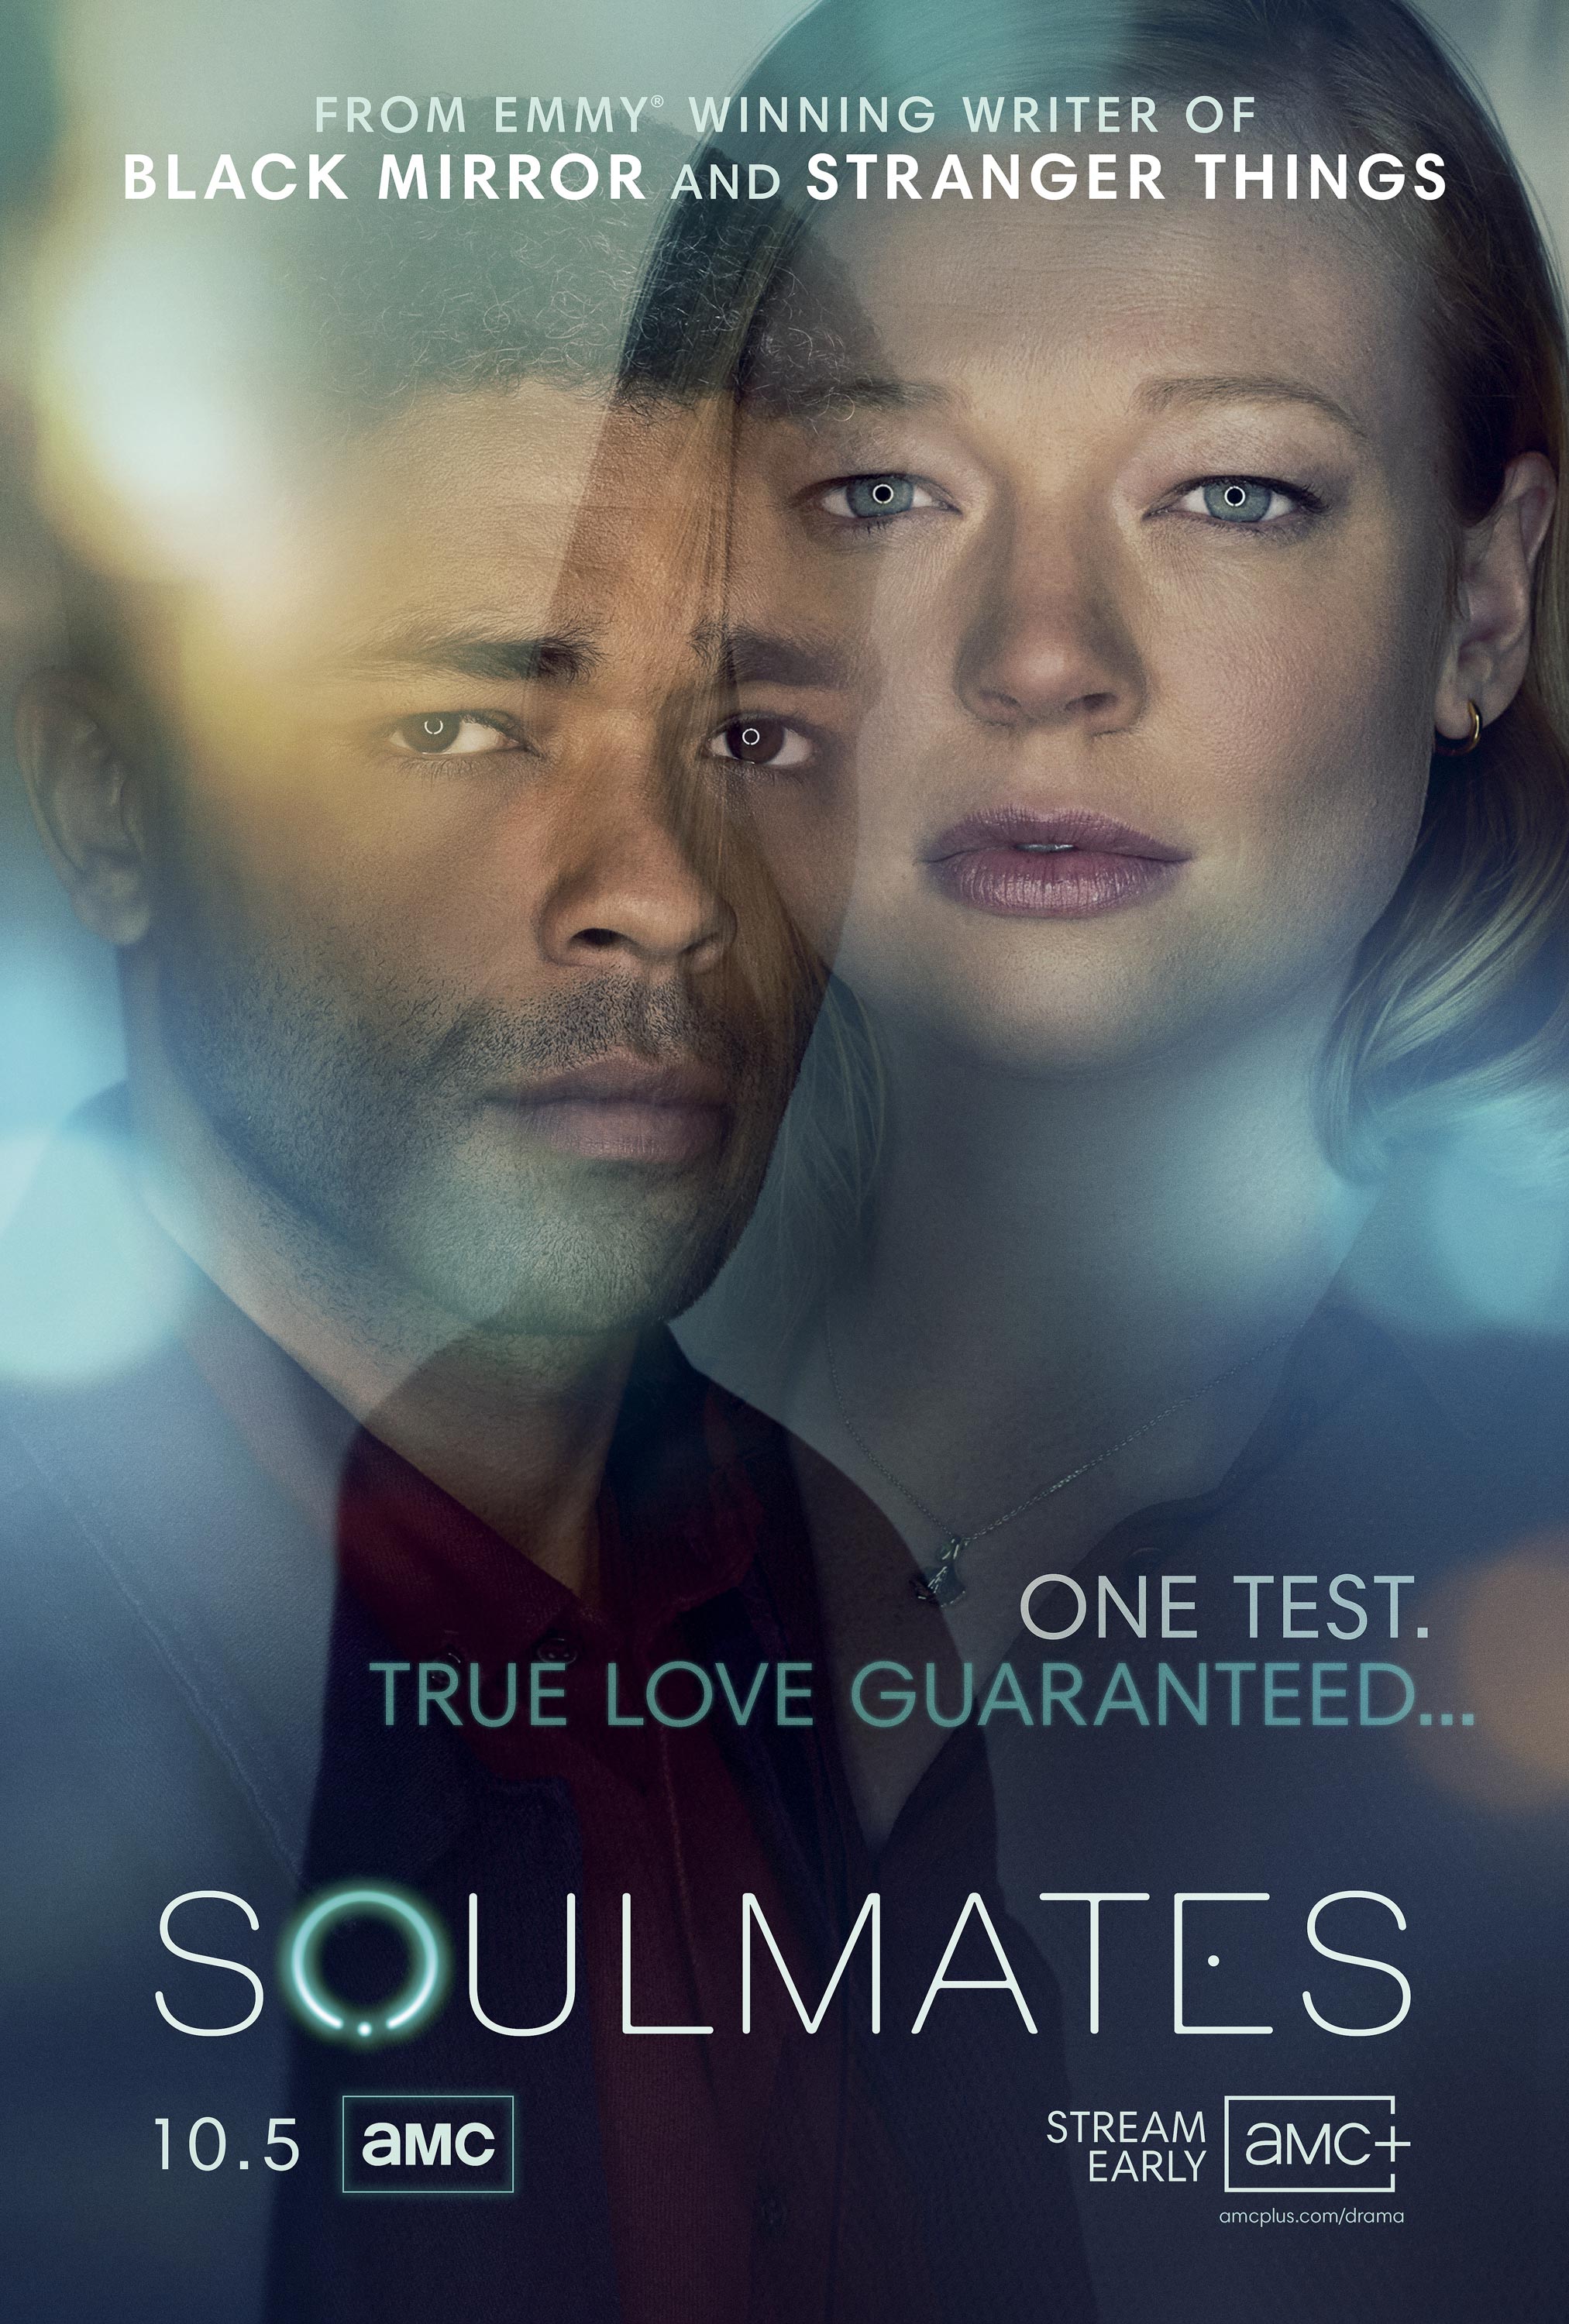 Soulmates Official Poster featuring Sarah Snook and Kingsley Ben-Adir Photography by Jorge Alvarino